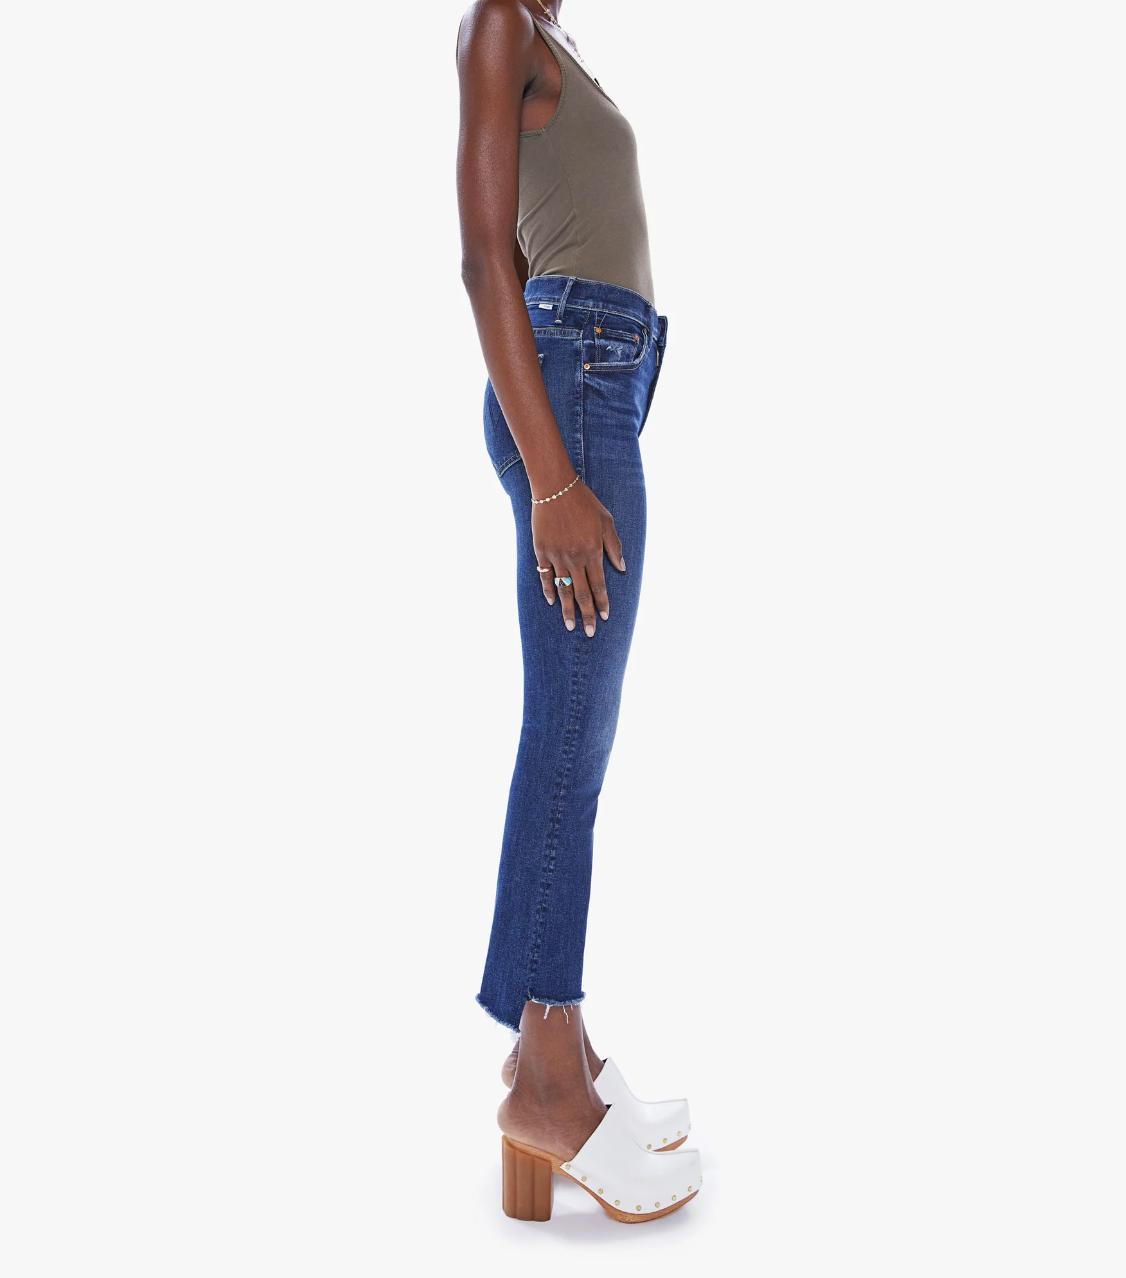 side view of the insider crop step fray jean from Mother in teaming up blue, styled with an olive green tank top and white clogs